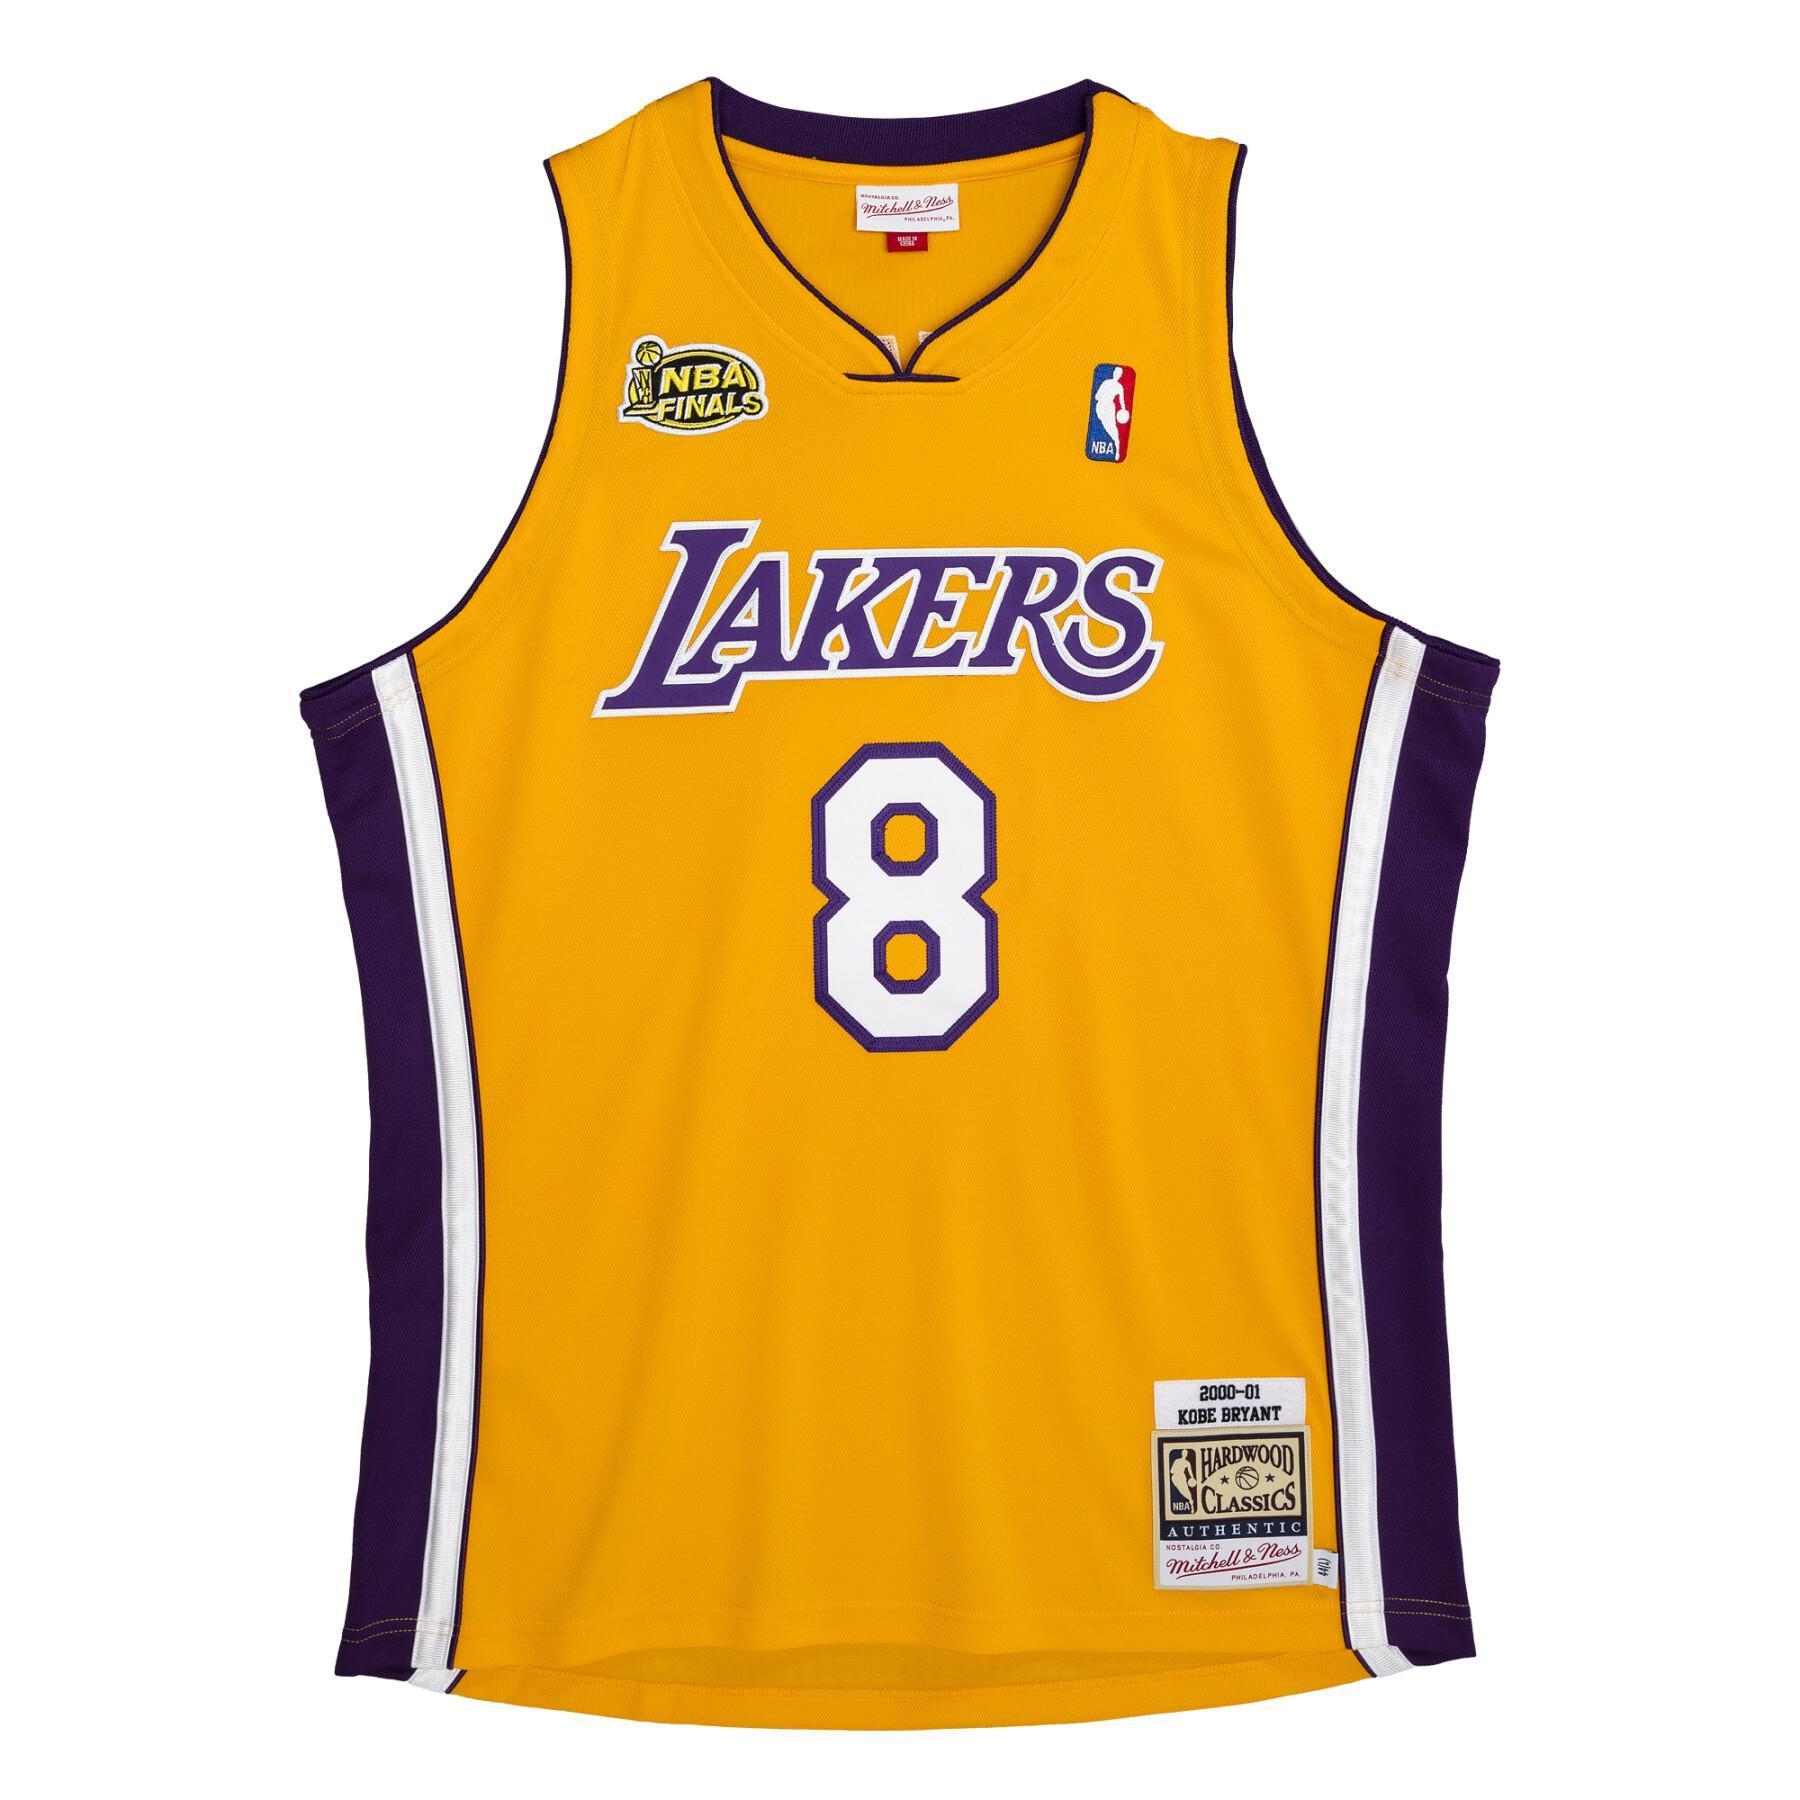 Jersey Los Angeles Lakers NBA Authentic 00 Kobe Bryant